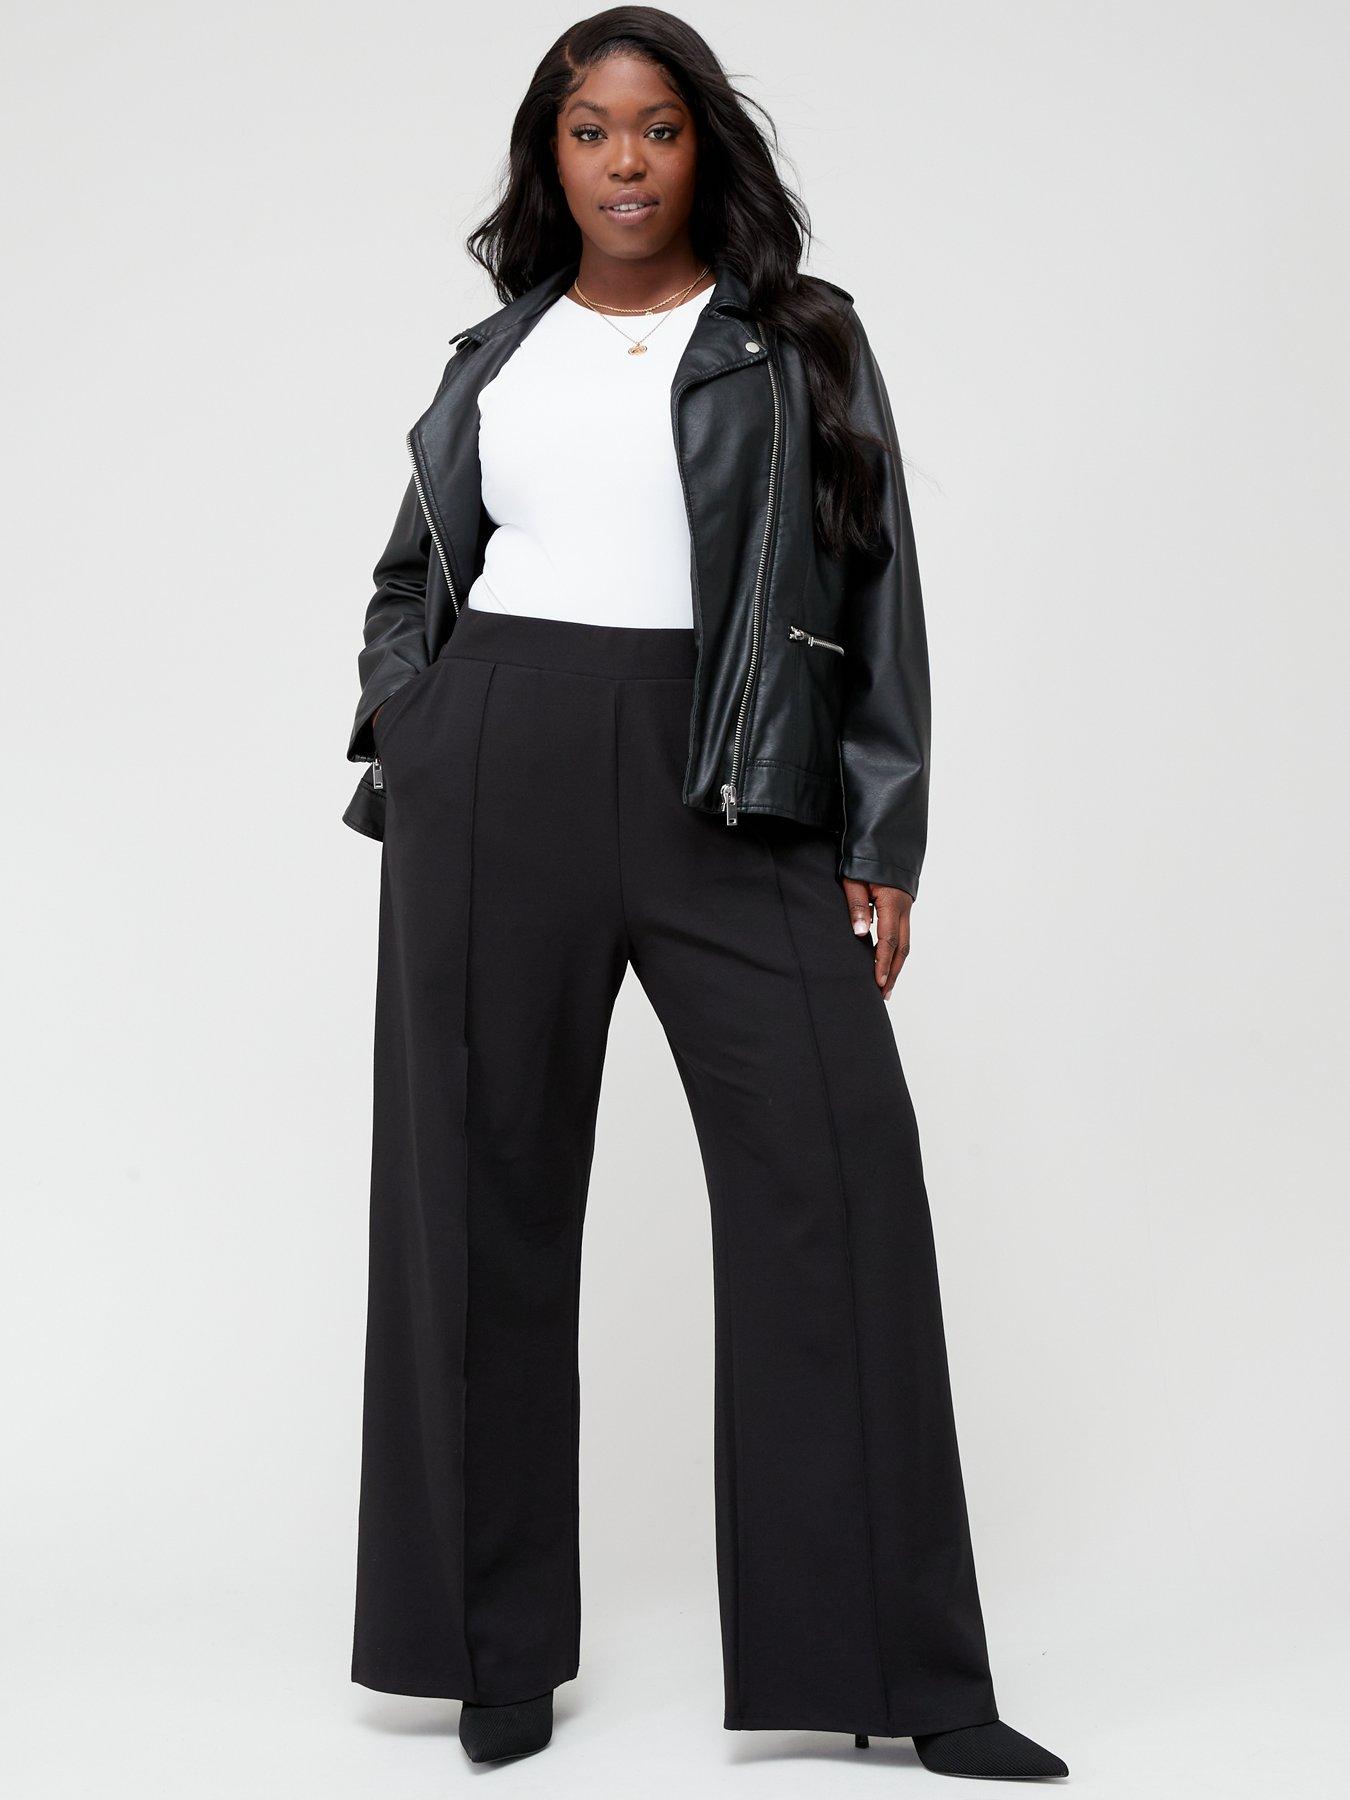 Neutral Plus Size Looks for the Spring — Vividly Bright